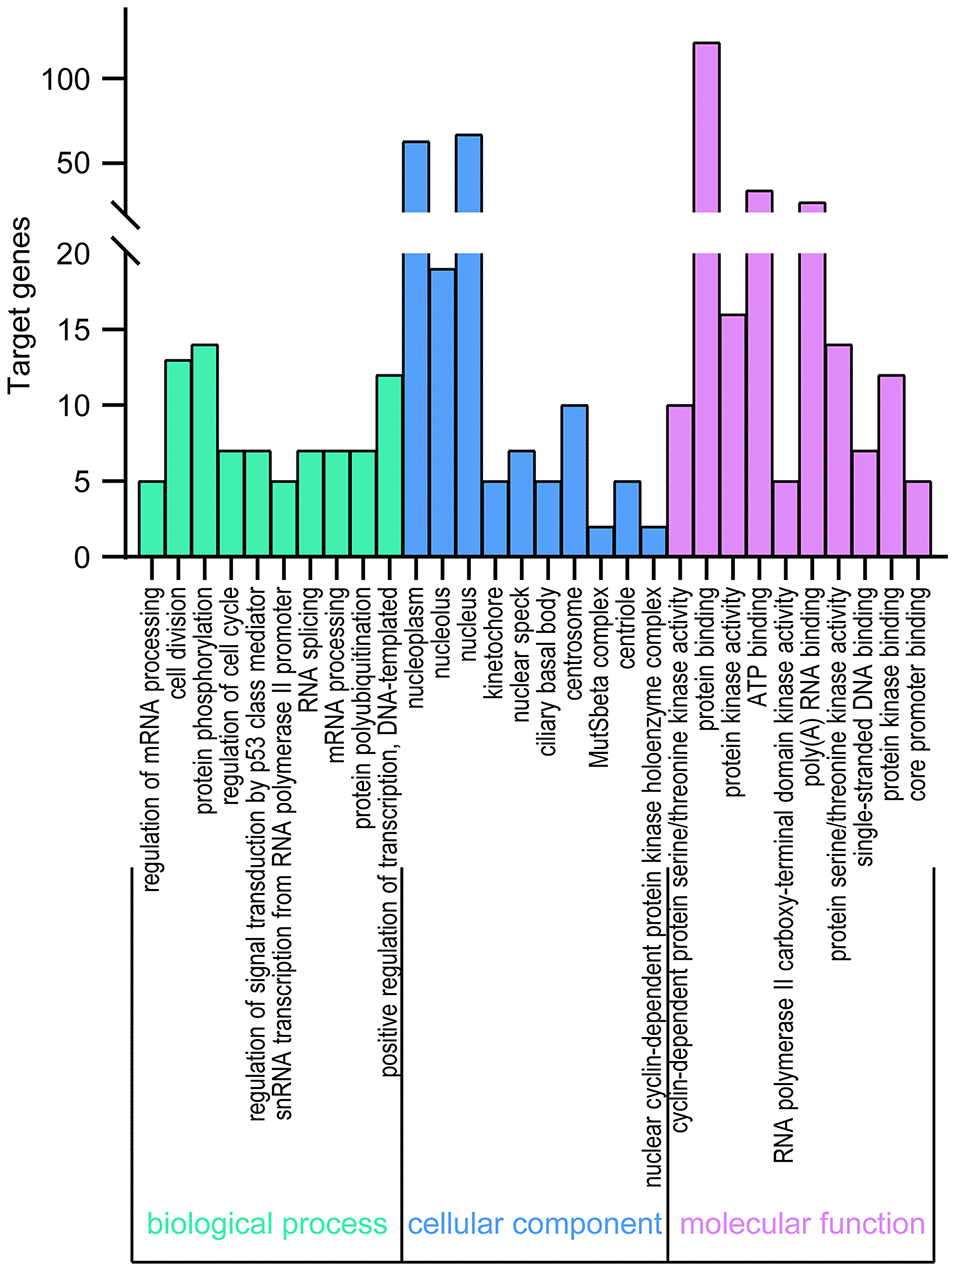 GO enrichment of TA-CDKs and their closest 200 neighboring genes. Significant GO terms across the CC, BP, and MF categories were extracted using DAVID 6.8.